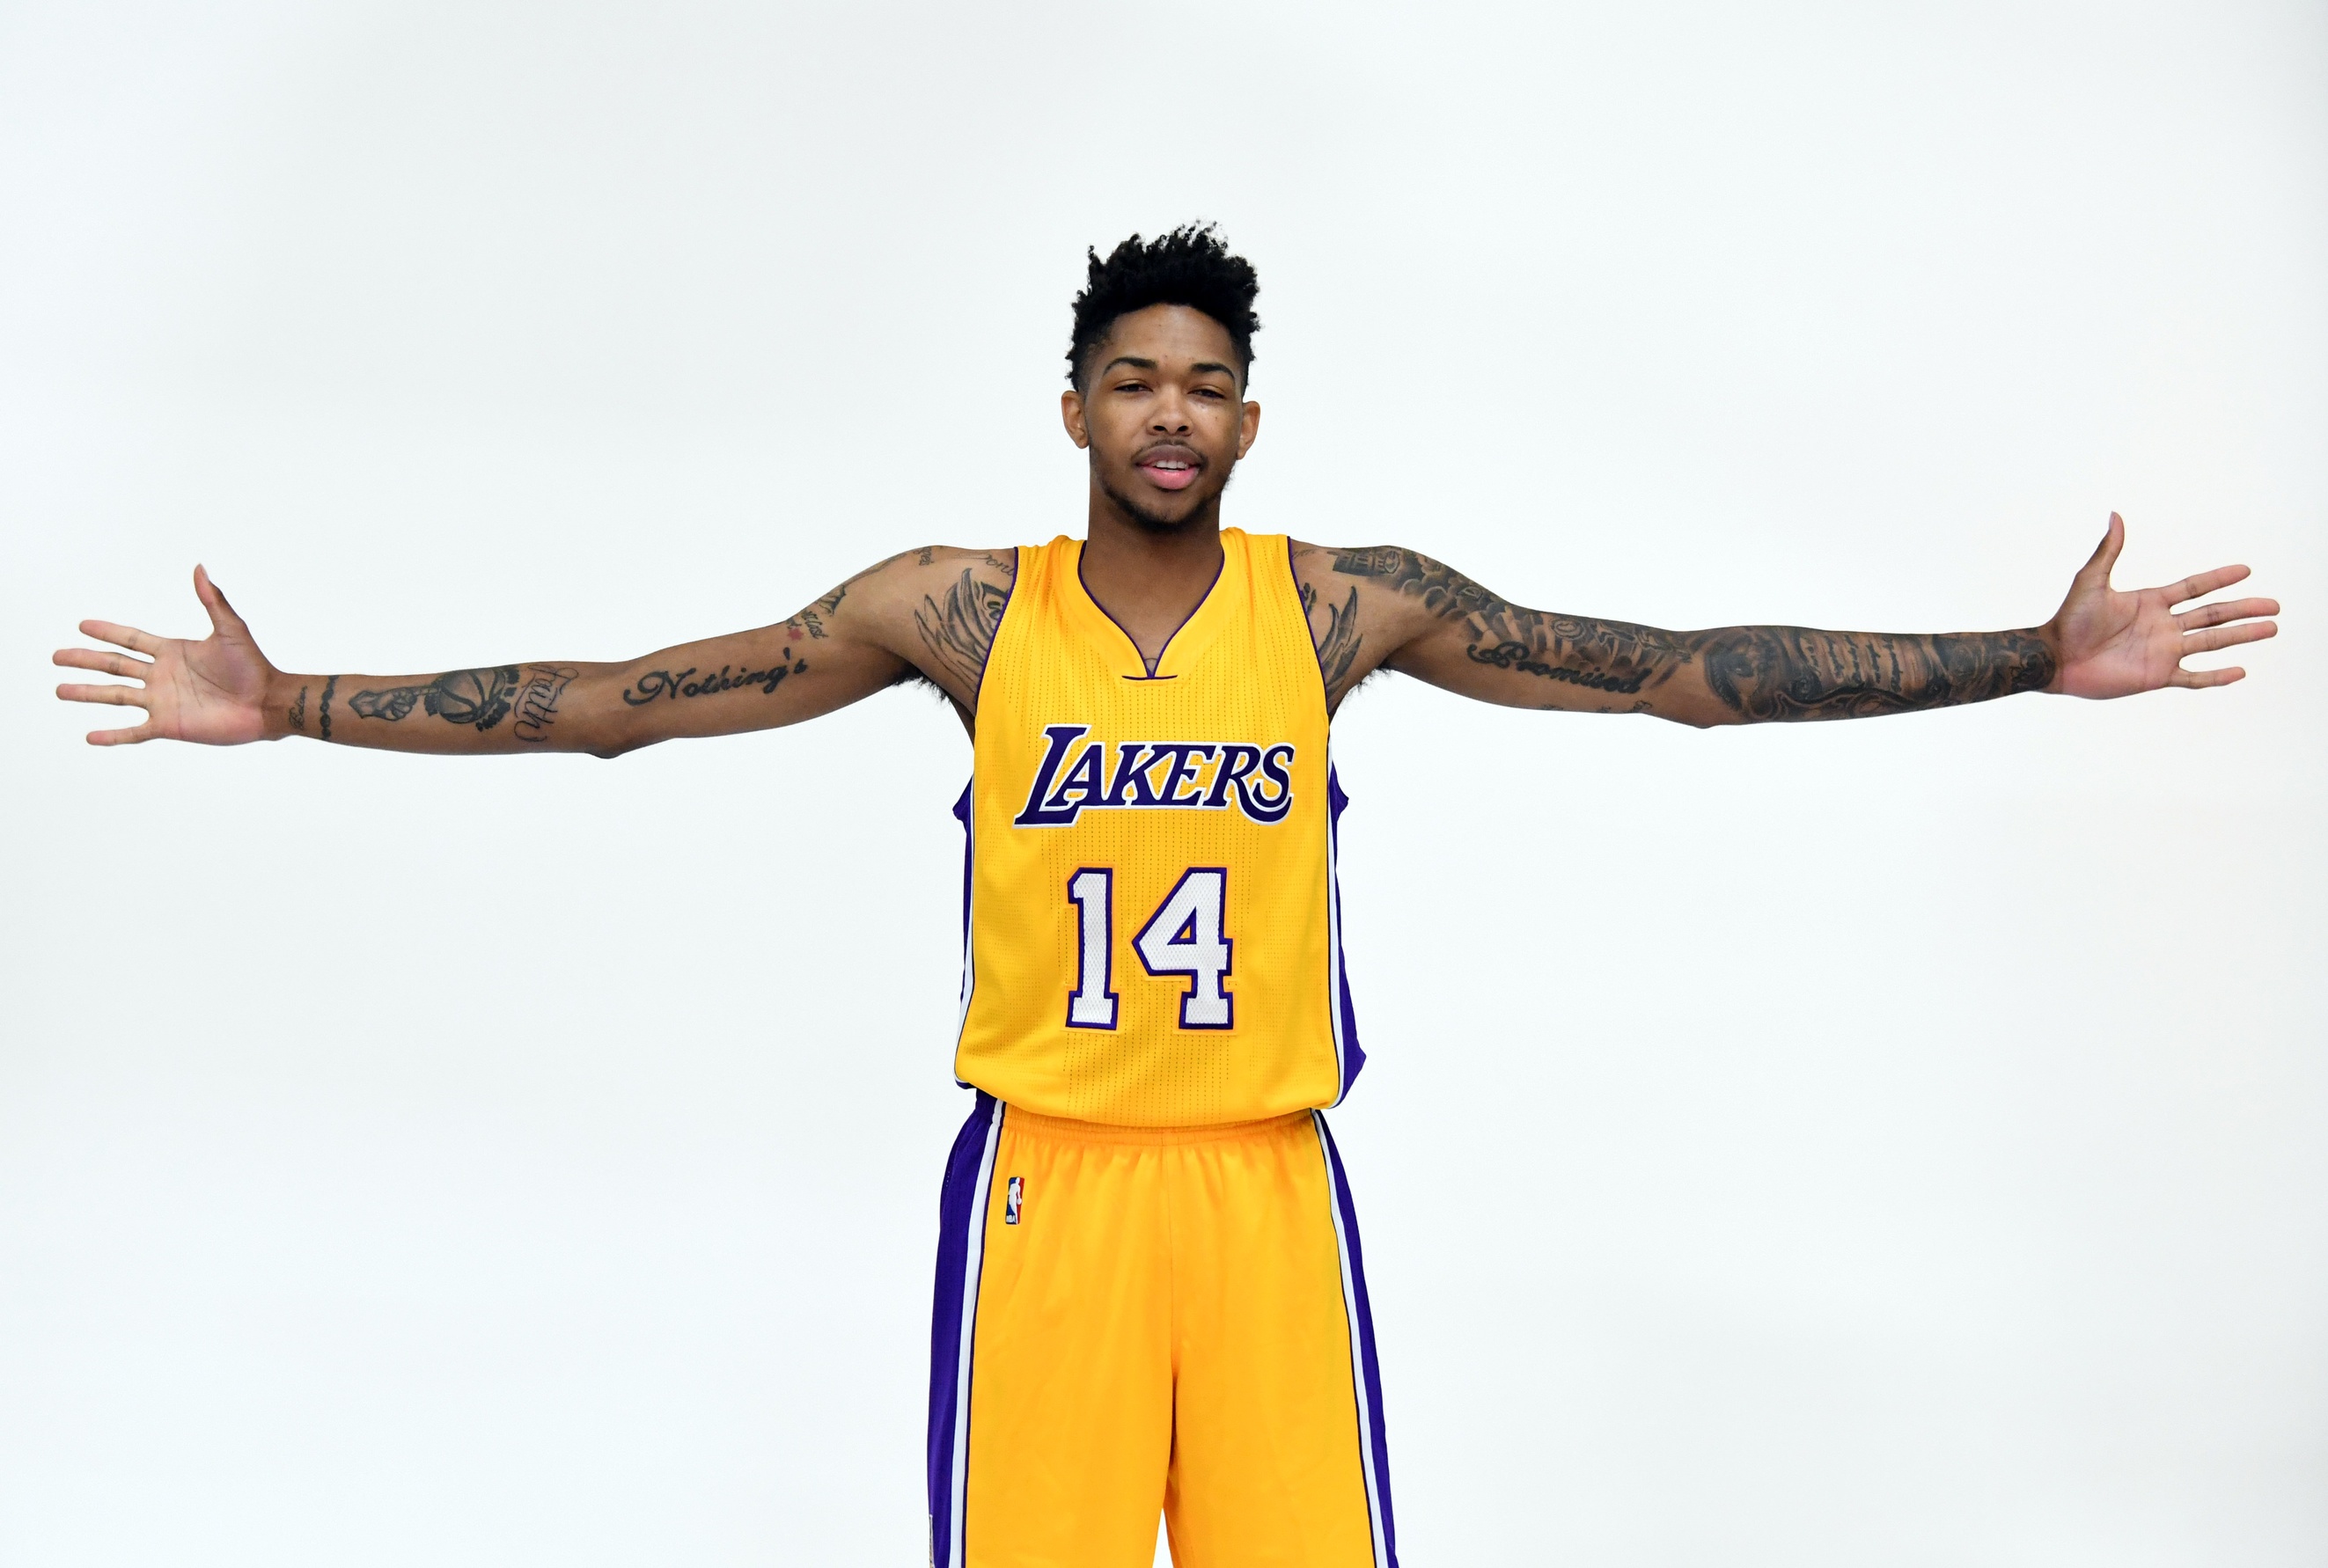 Brandon Ingram May Be D'Angelo Russell's Road Block To Stardom